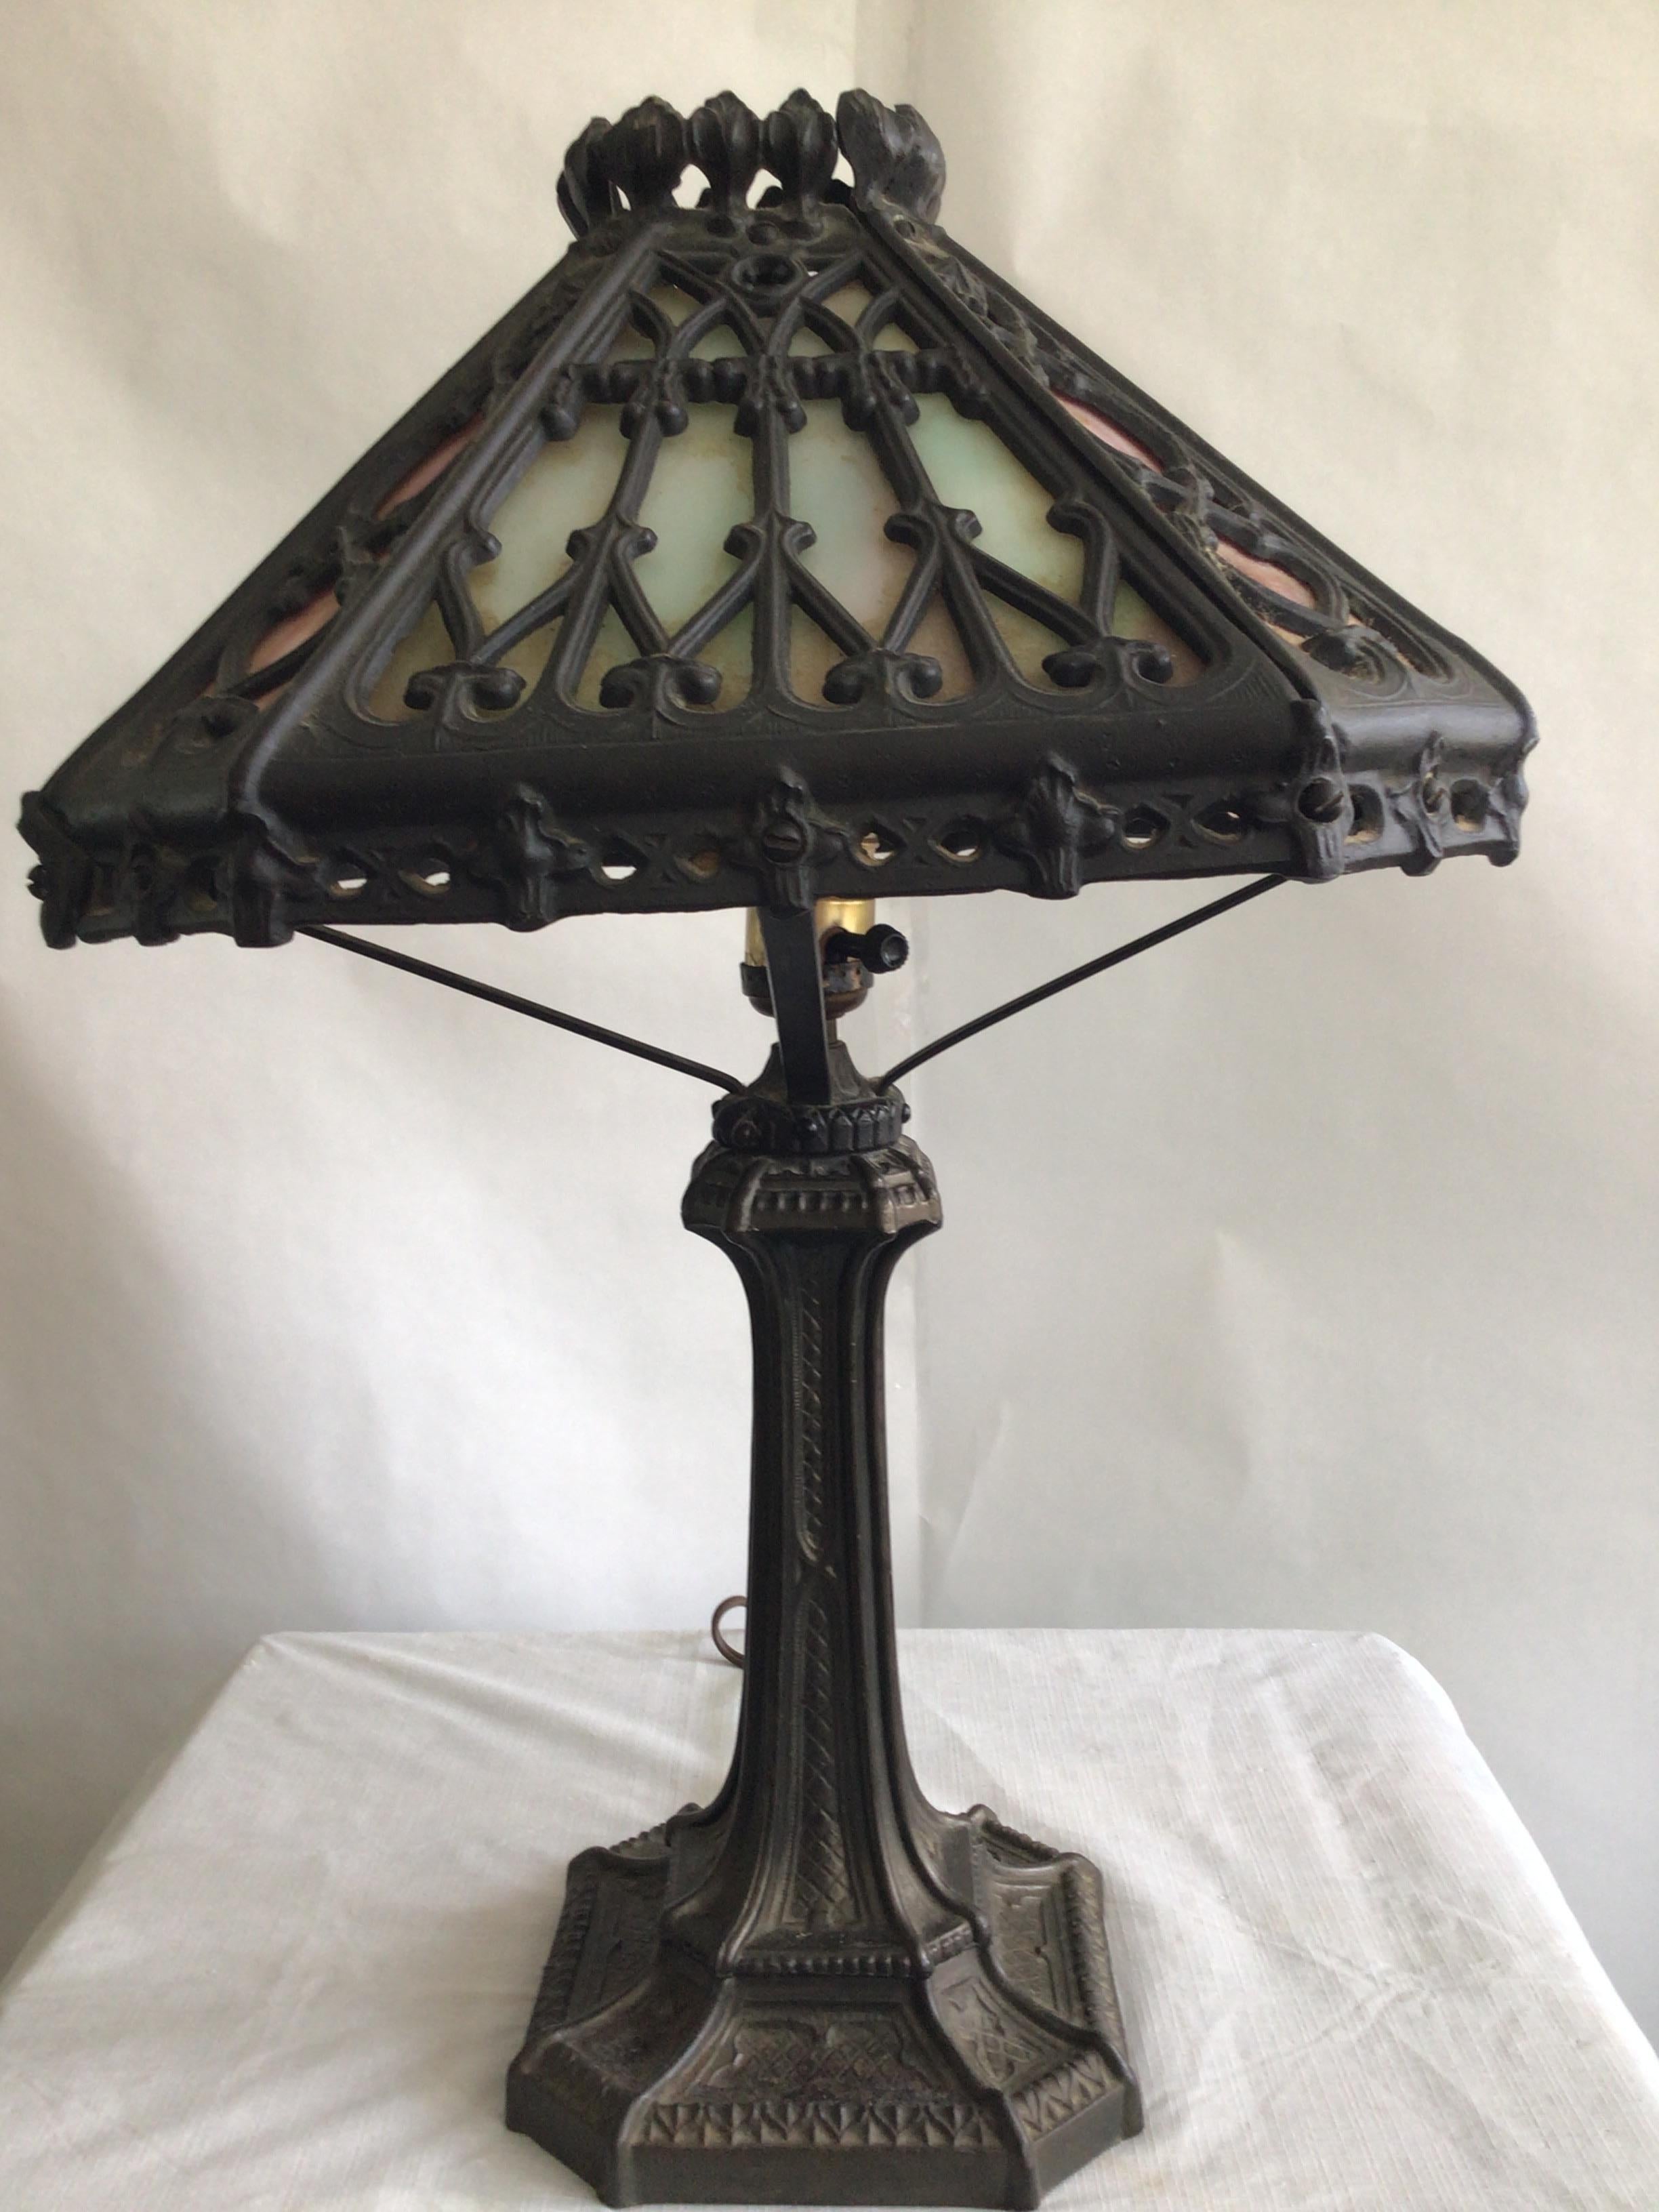 1920a Ornate Iron Leaded Glass Table Lamp
Height to top of shade
Mint greens and pink stained glass
Needs Rewiring
Shade Tilts a bit - needs adjustment